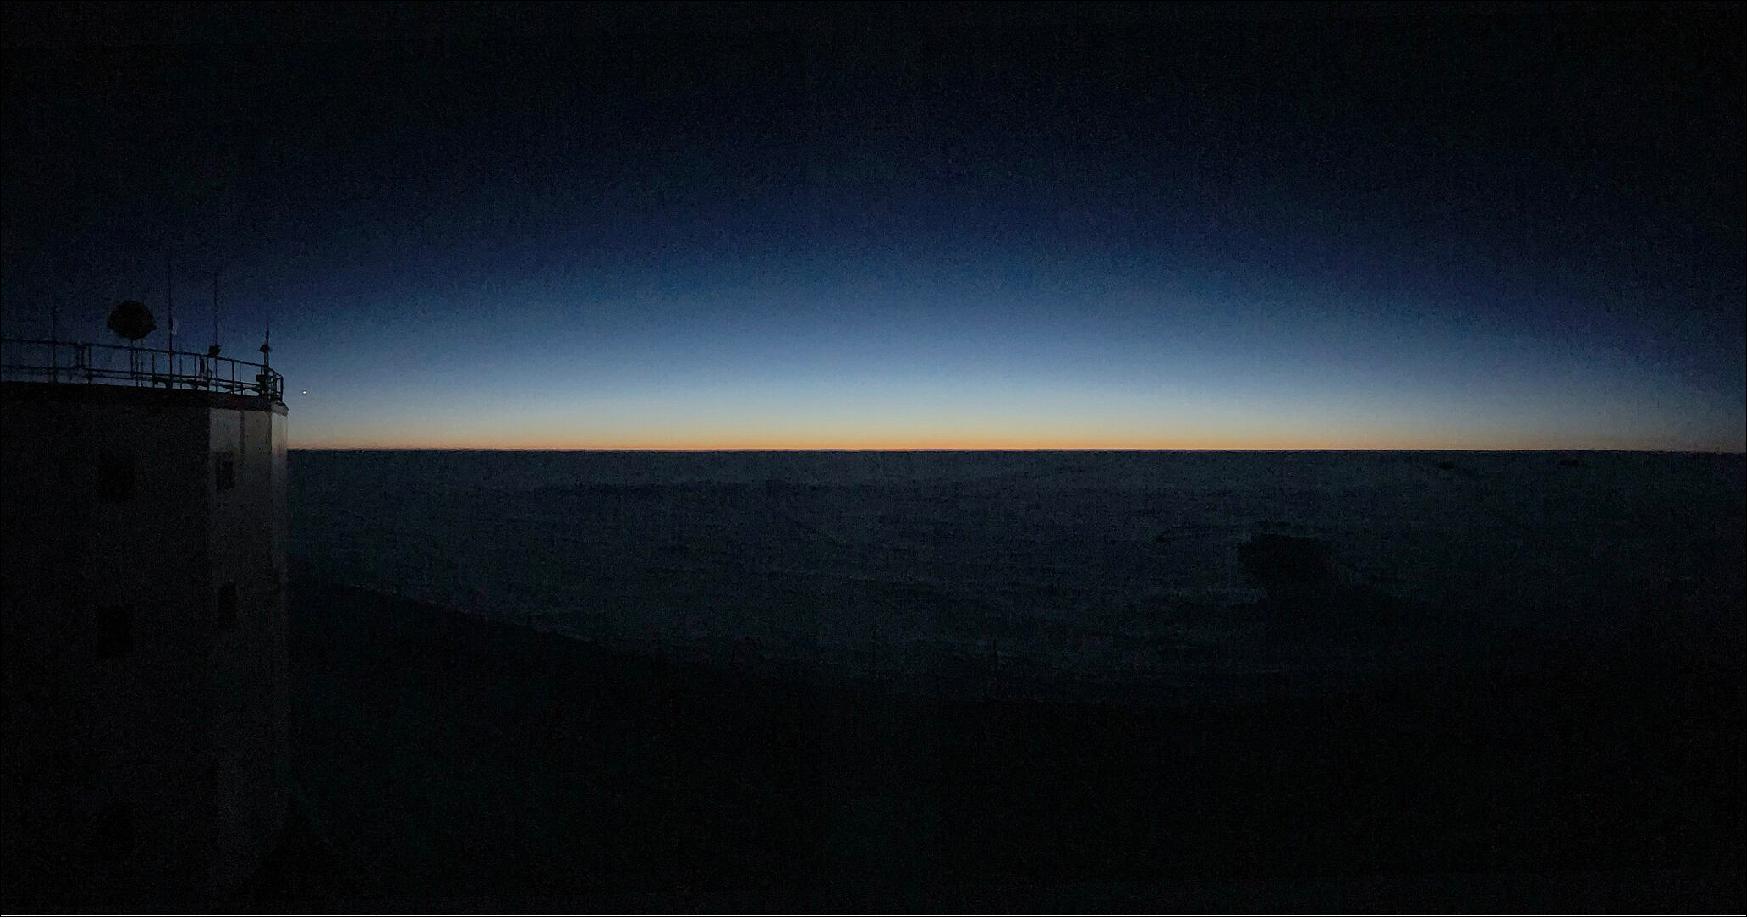 Figure 5: For the crew of up to fifteen who work and live in one of the most remote outposts in the world, the long goodbye to the Sun is bittersweet. For six months they will live and work in isolation; no supplies or people can be flown in as temperatures can drop to –80ºC in the complete frozen darkness outside (image credit: IPEV/PNRA/ESA–H. Hagson)